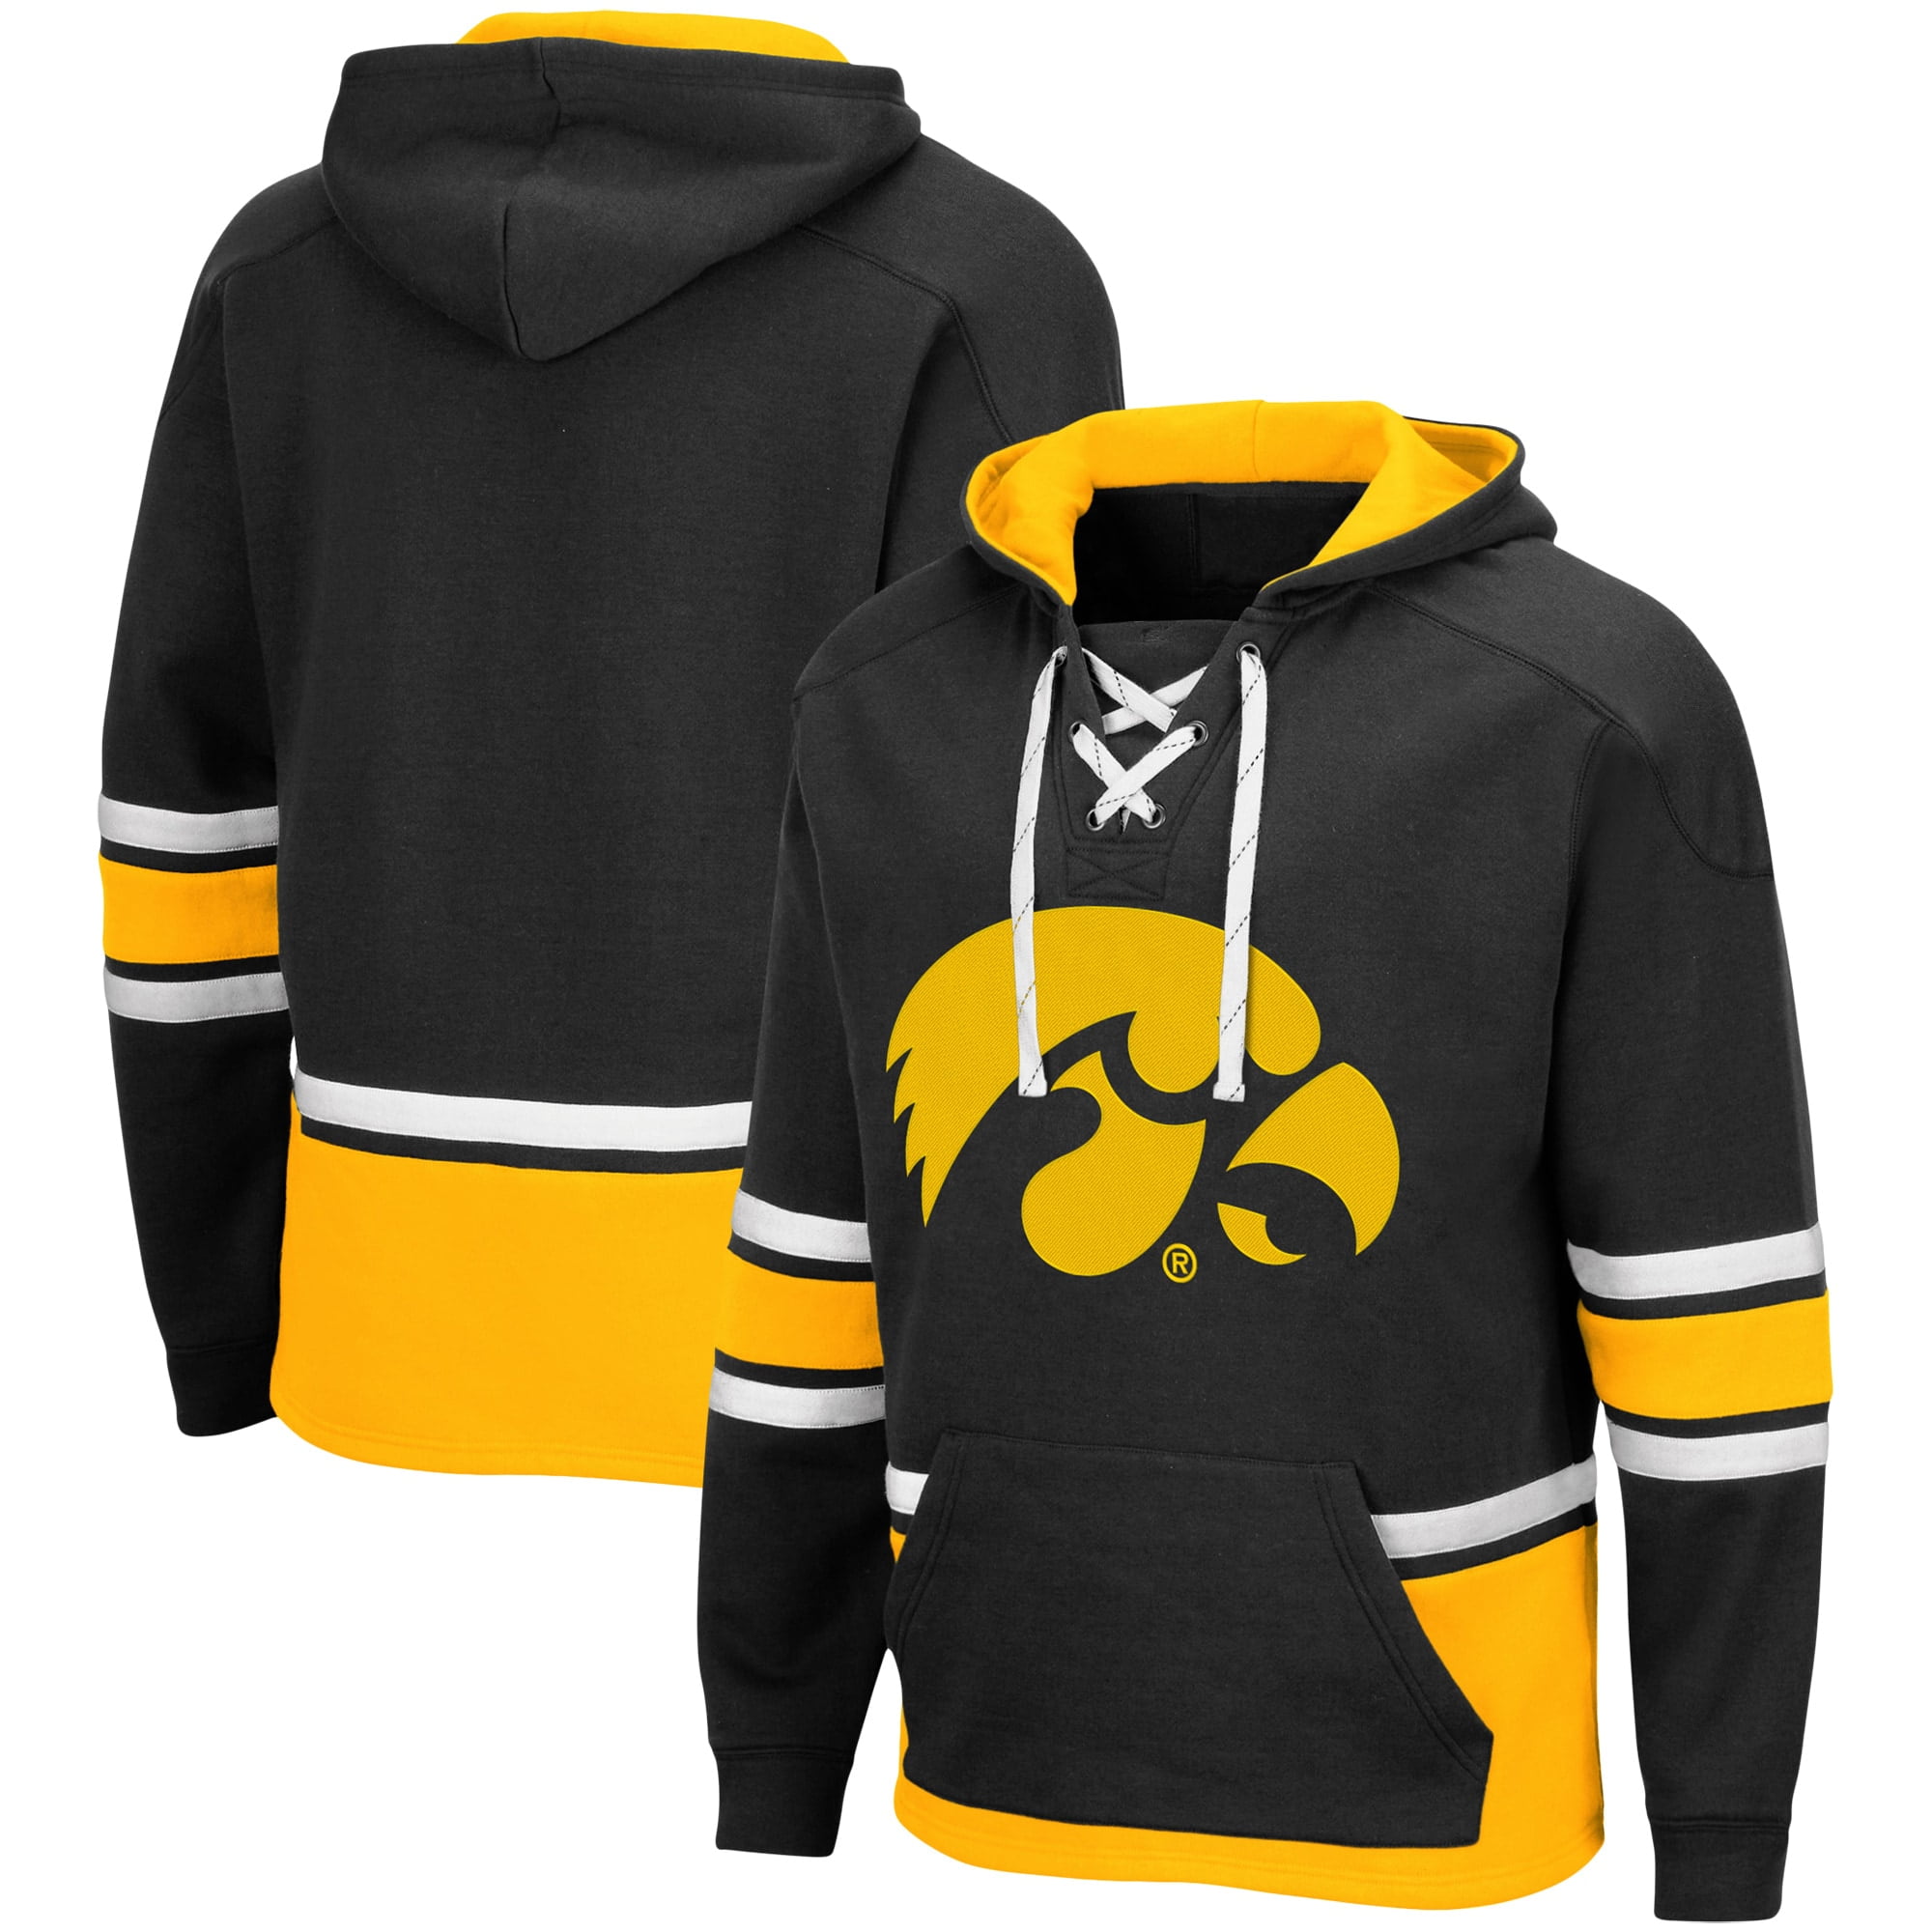 Men's Colosseum Black Iowa Hawkeyes 2.0 Lace-Up Pullover Hoodie 